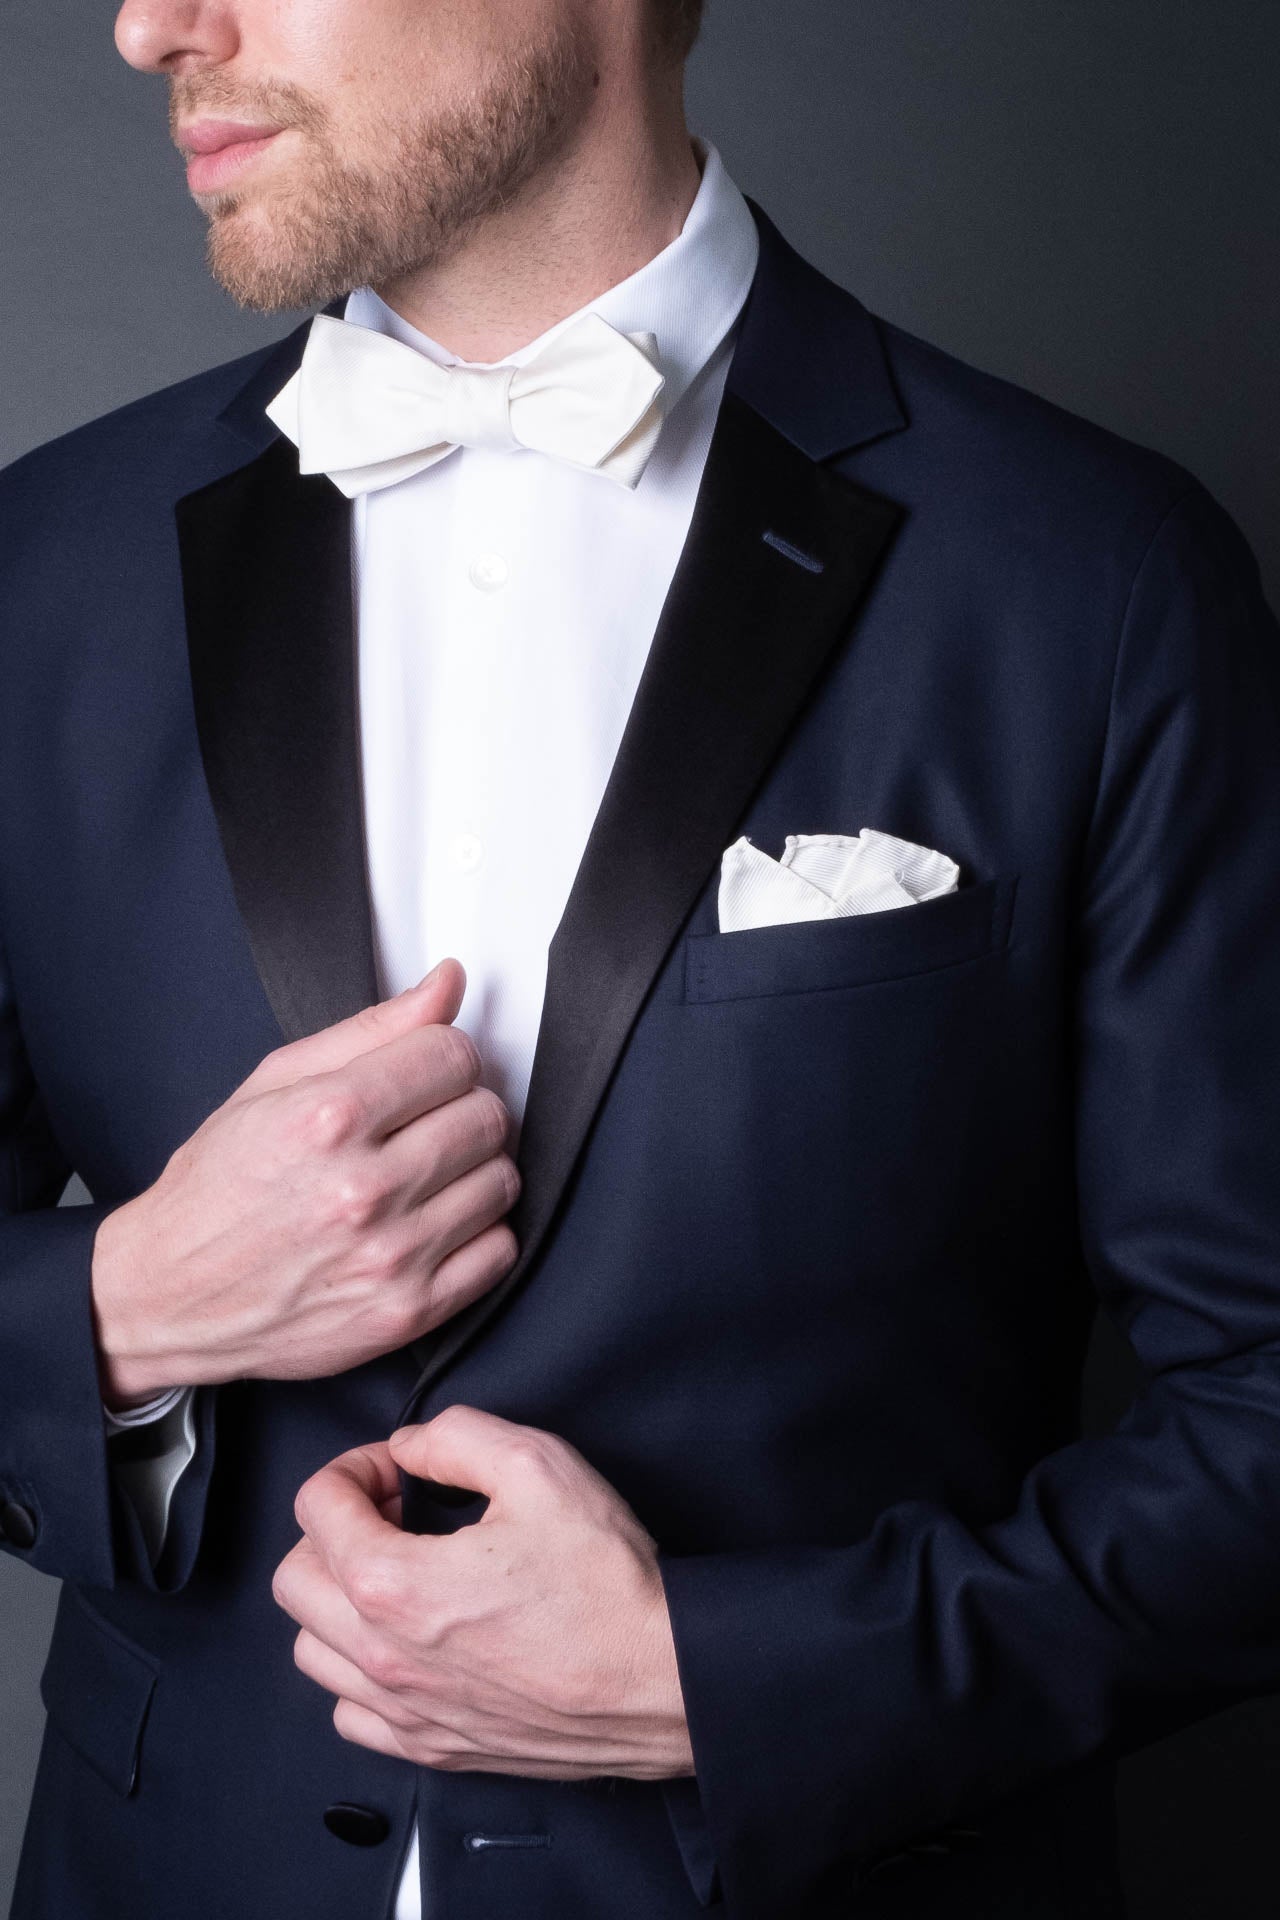 Mens Suit Hire | Tuxedo Hire, Morning Suits | Moss Bros Hire